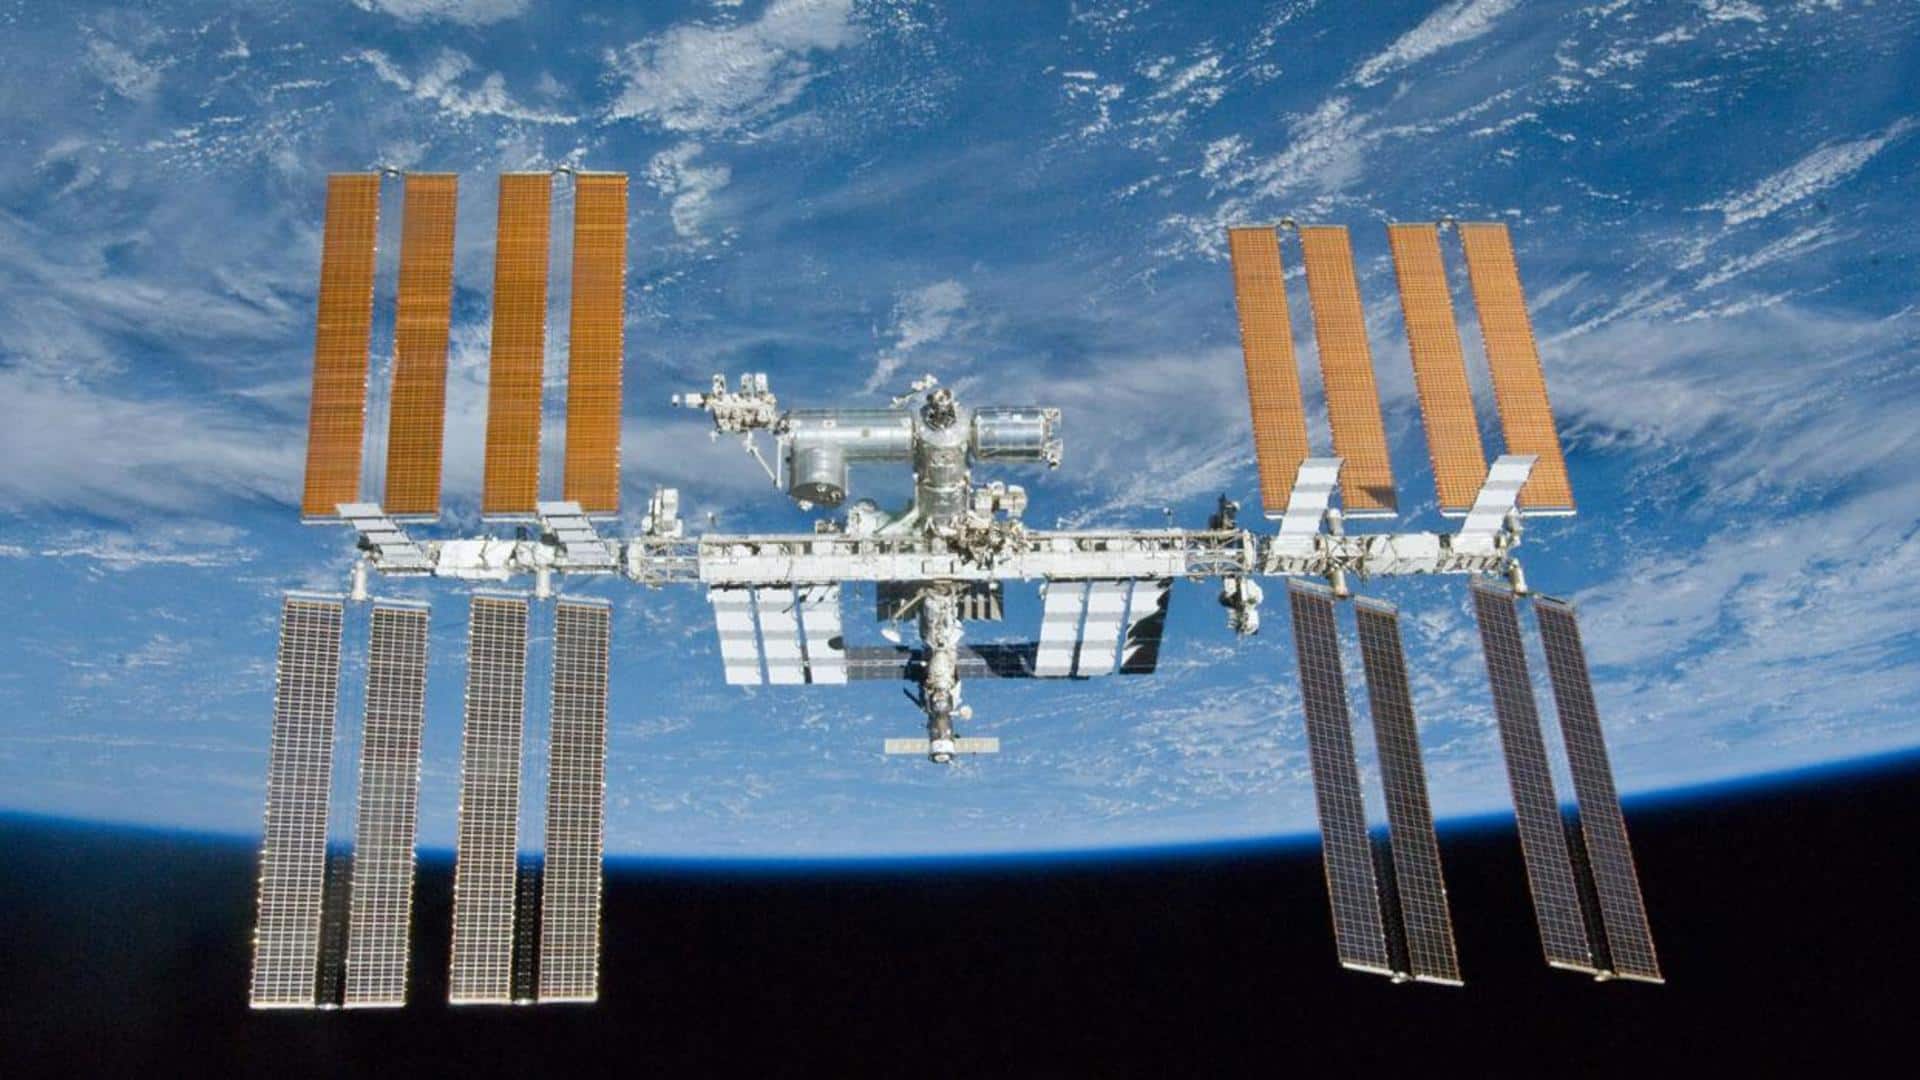 Here's how these astronauts grew tomatoes on the ISS